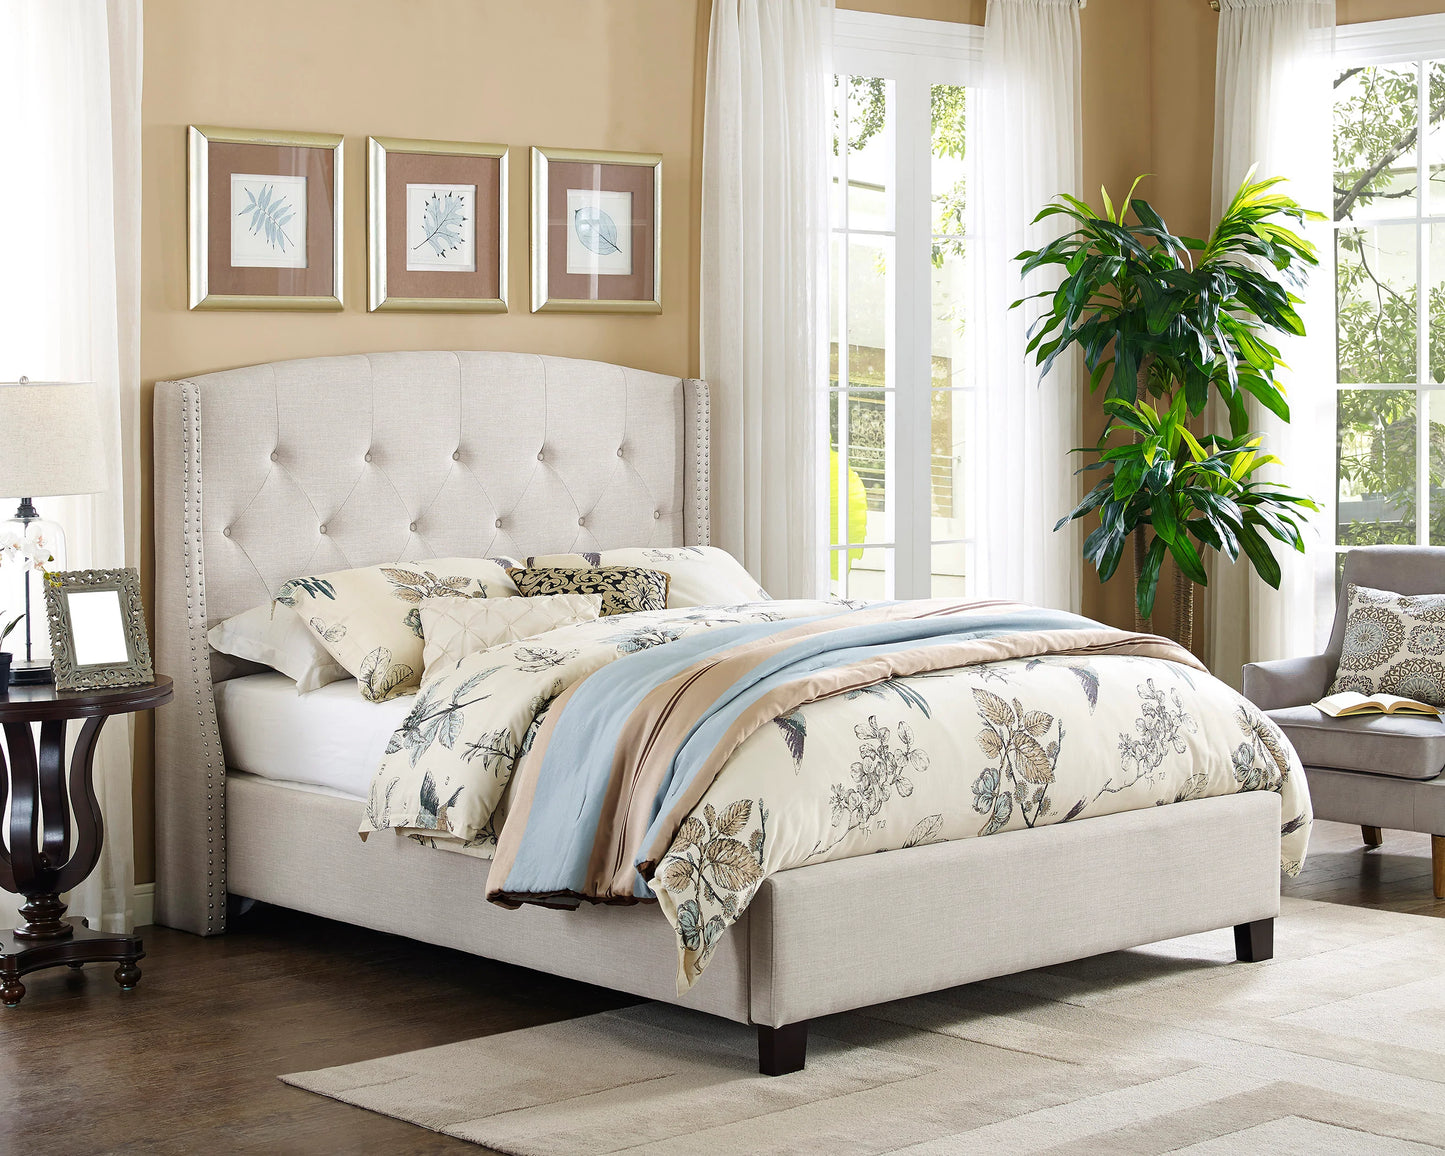 Beige Linen Upholstered Bed Headboard with Nailhead